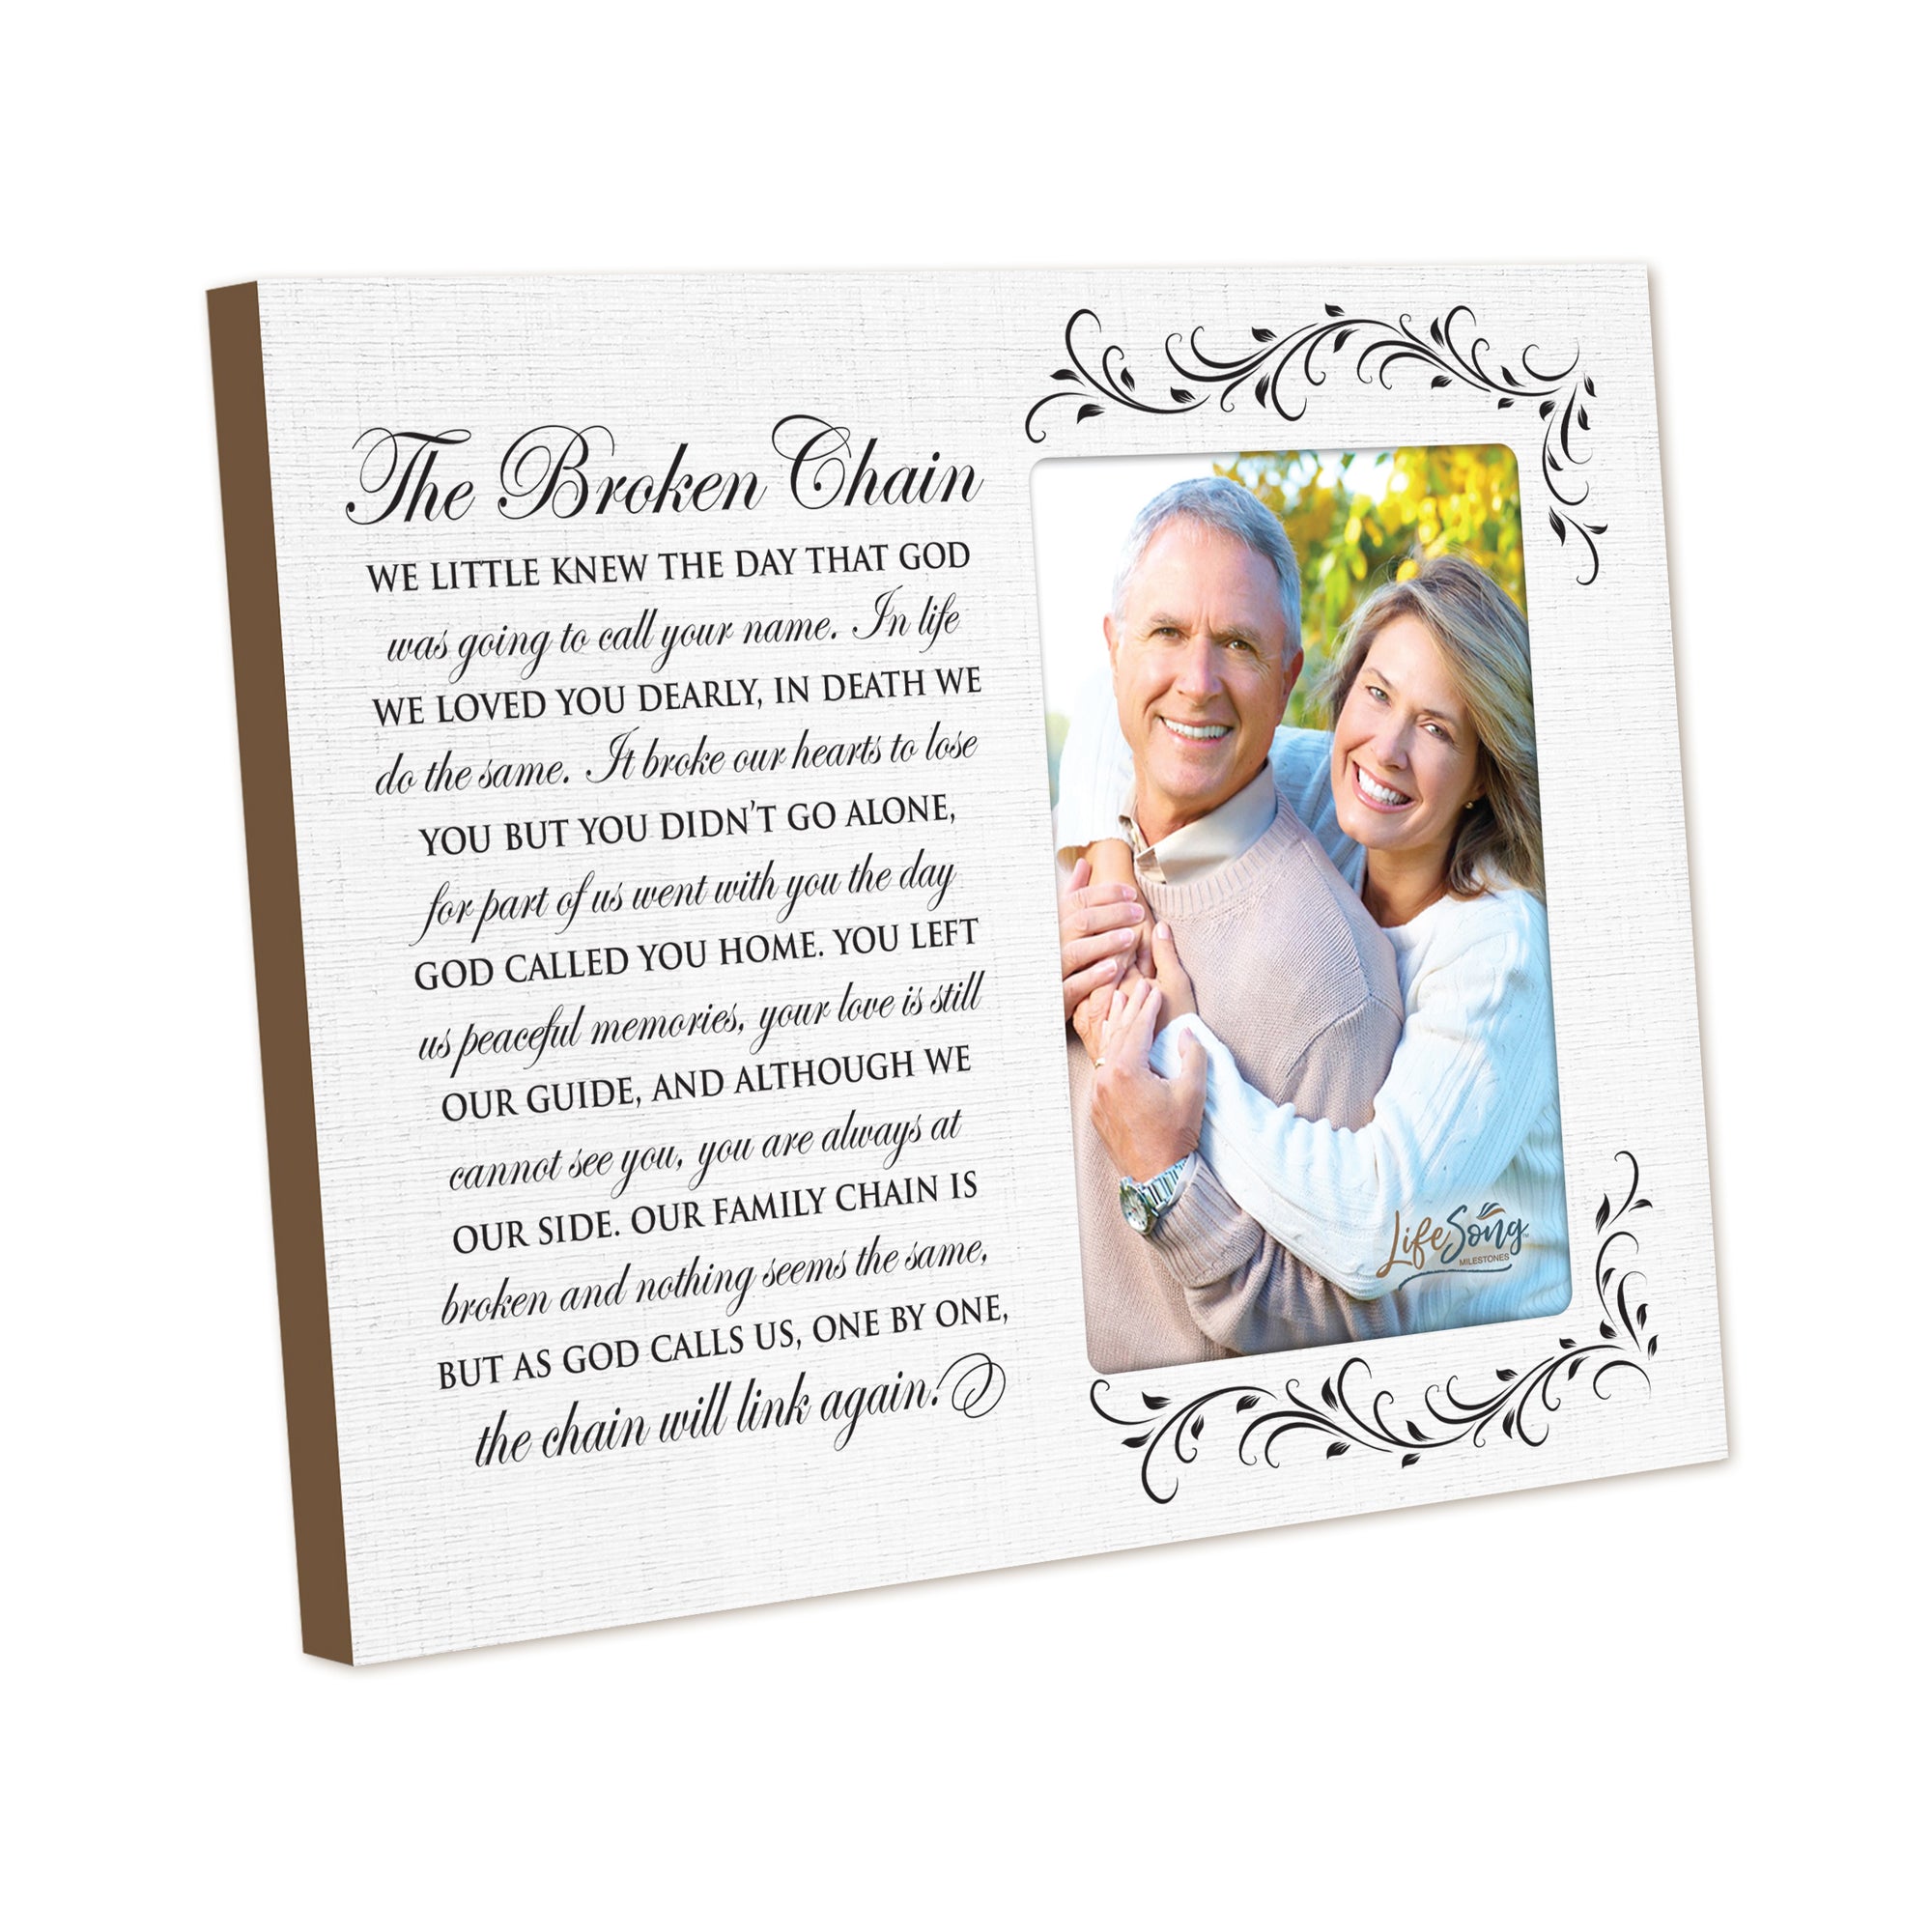 Rustic-Inspired Memorial Photo Frame: A Cherished Remembrance